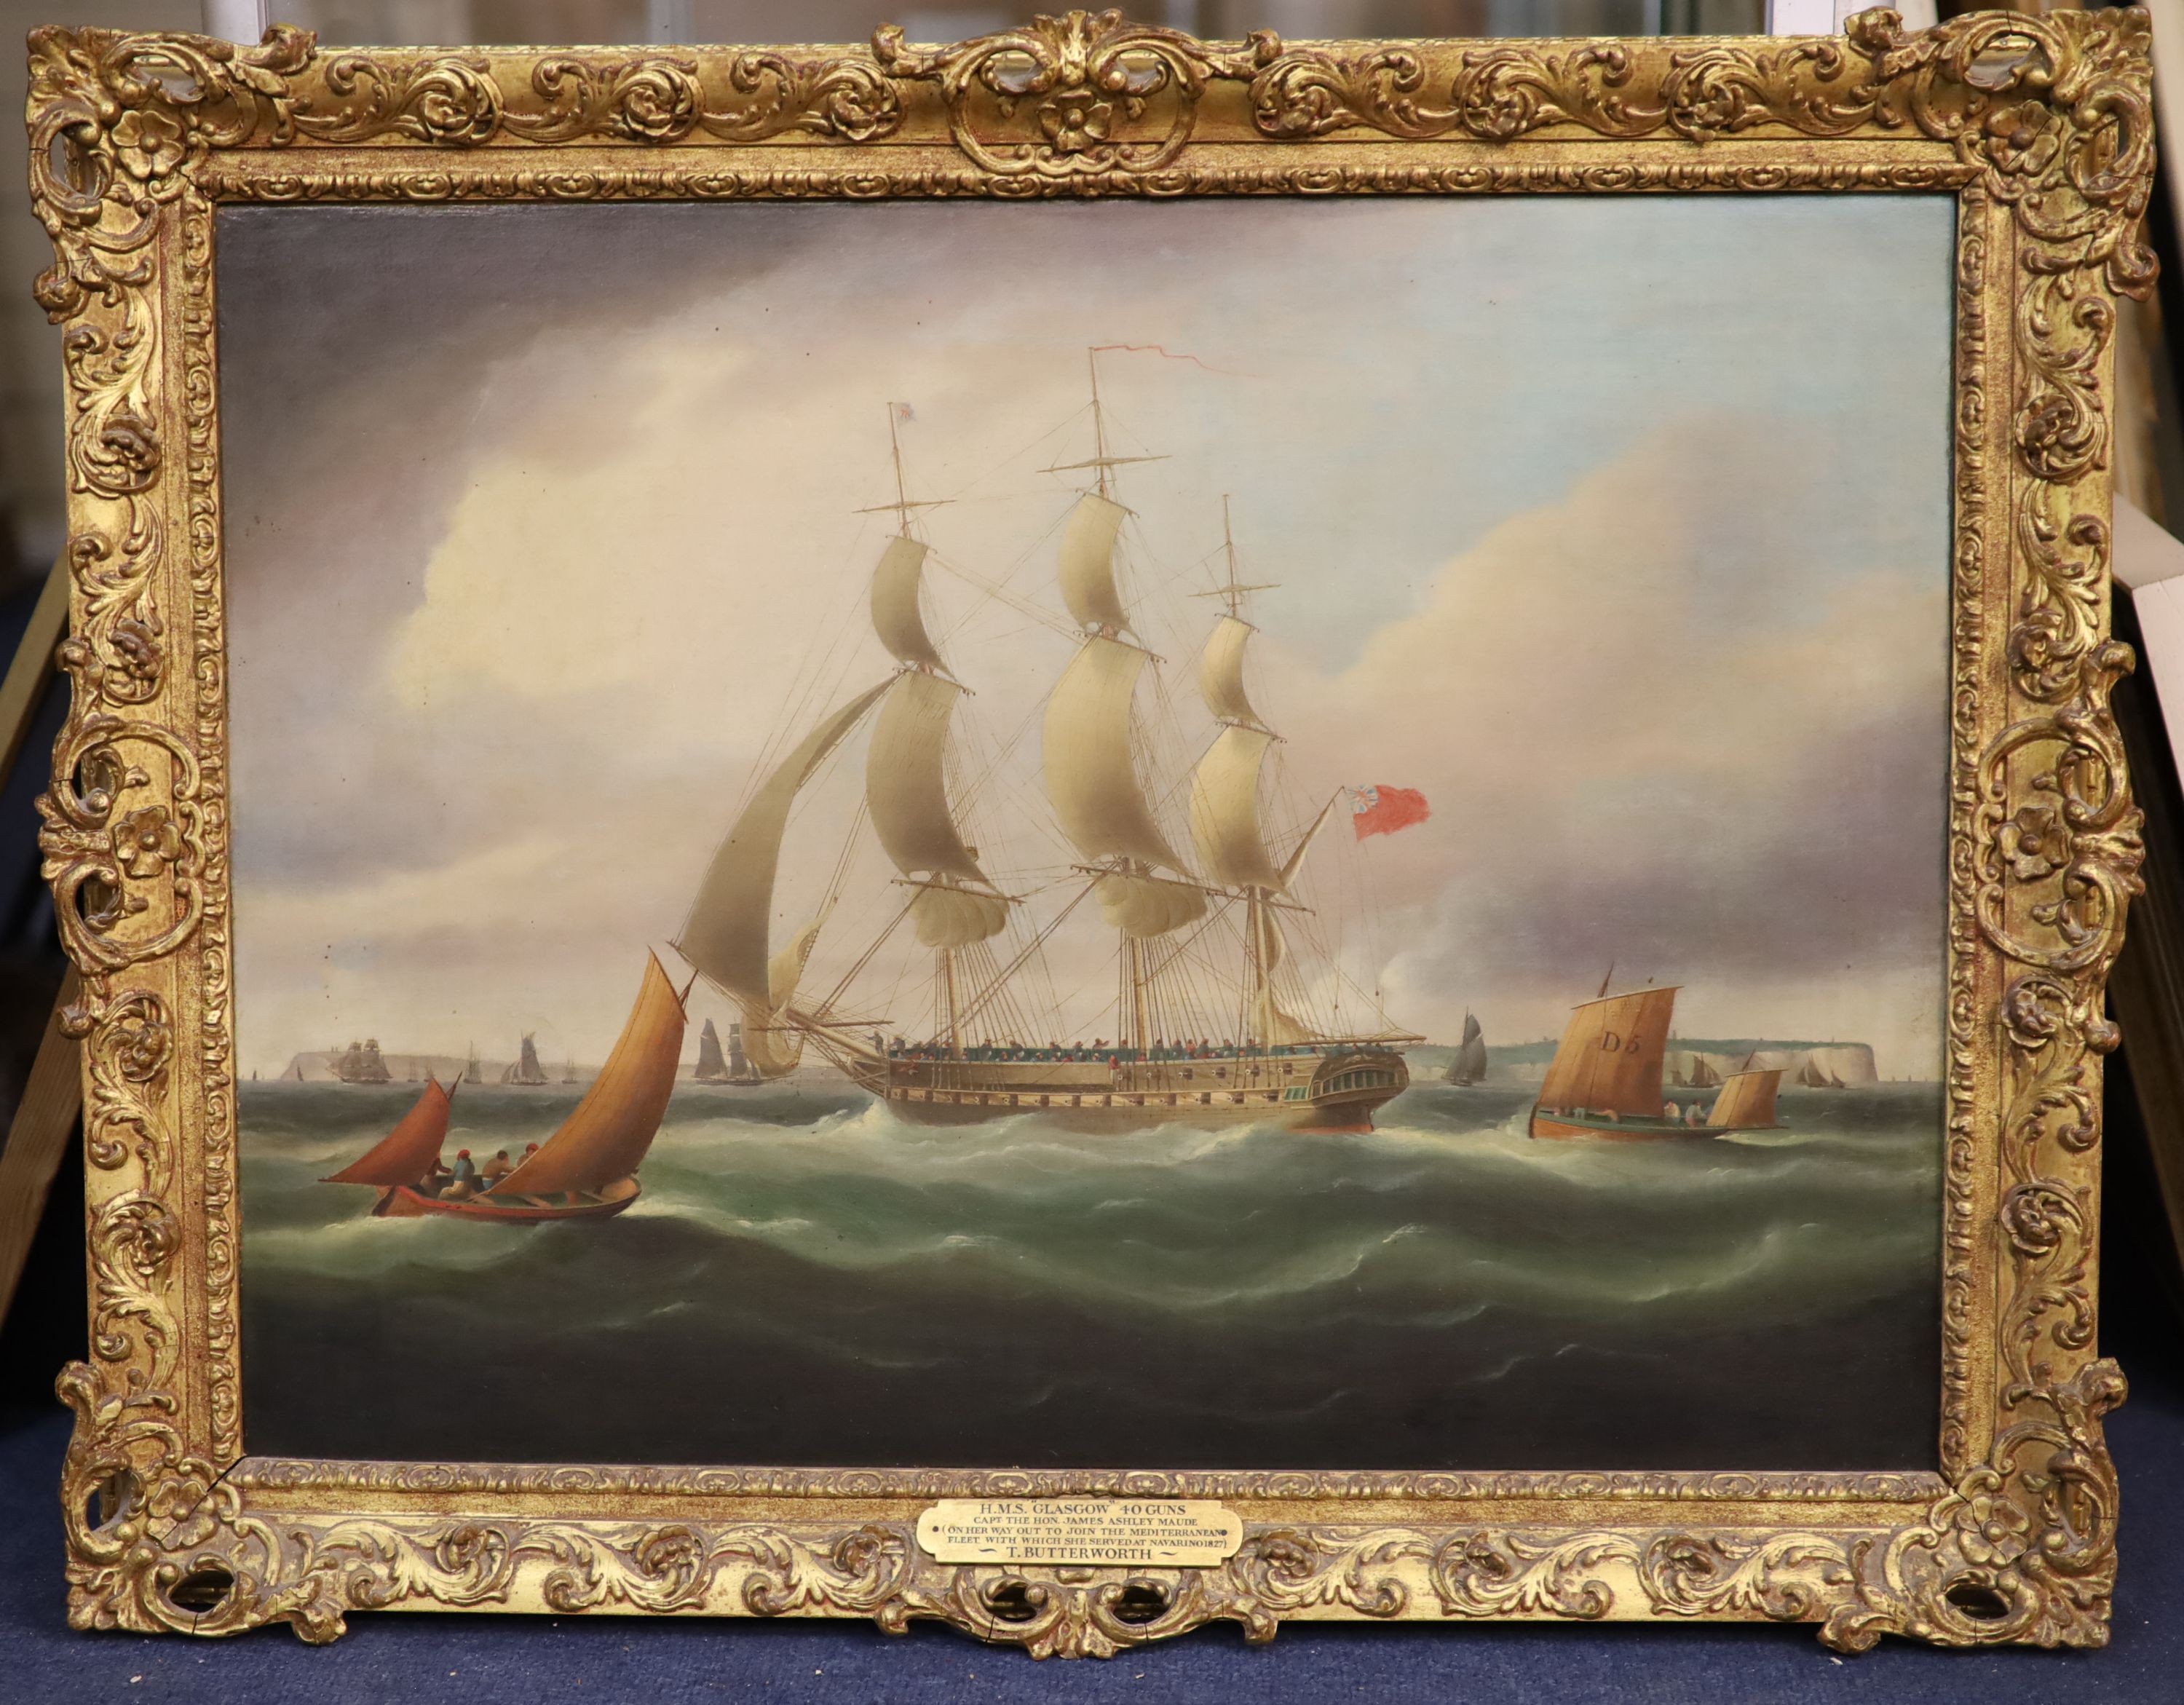 Thomas Buttersworth (1768-1842), HMS Glasgow, 40 Guns, Captain The Hon. James Ashley Maude (on her way out to join the Mediterranean fleet with which she served as Navarino 1827), oil on canvas, 45 x 60.5cm